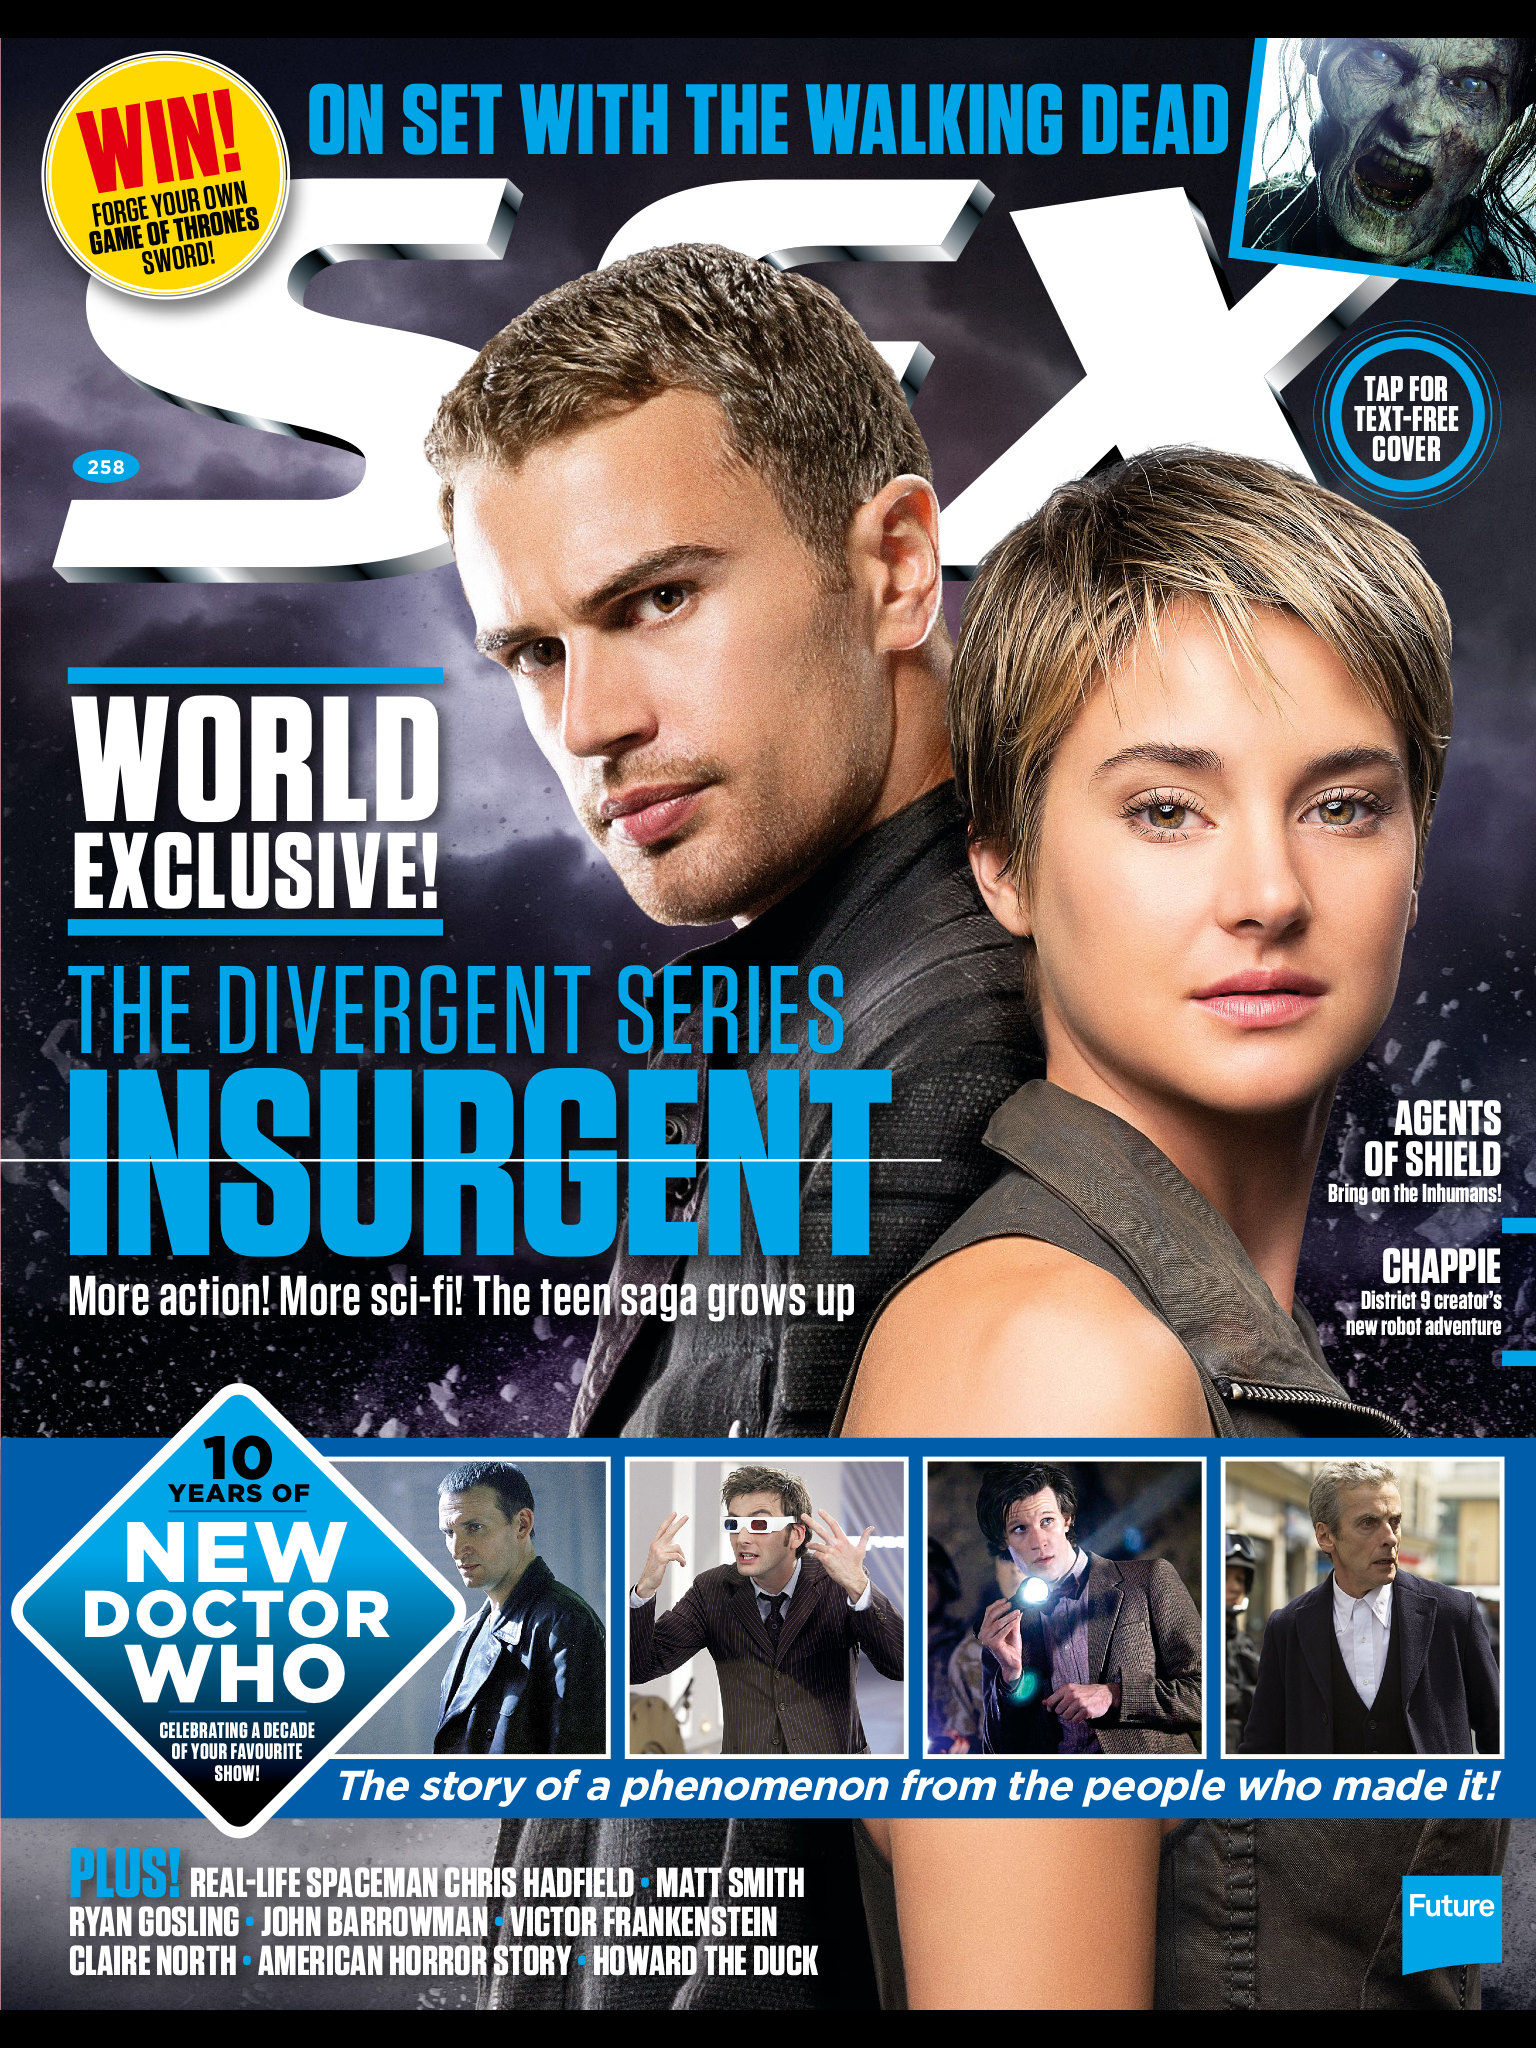 HQ SCANS: Theo James and Shailene Woodley Interview for SFX Magazine